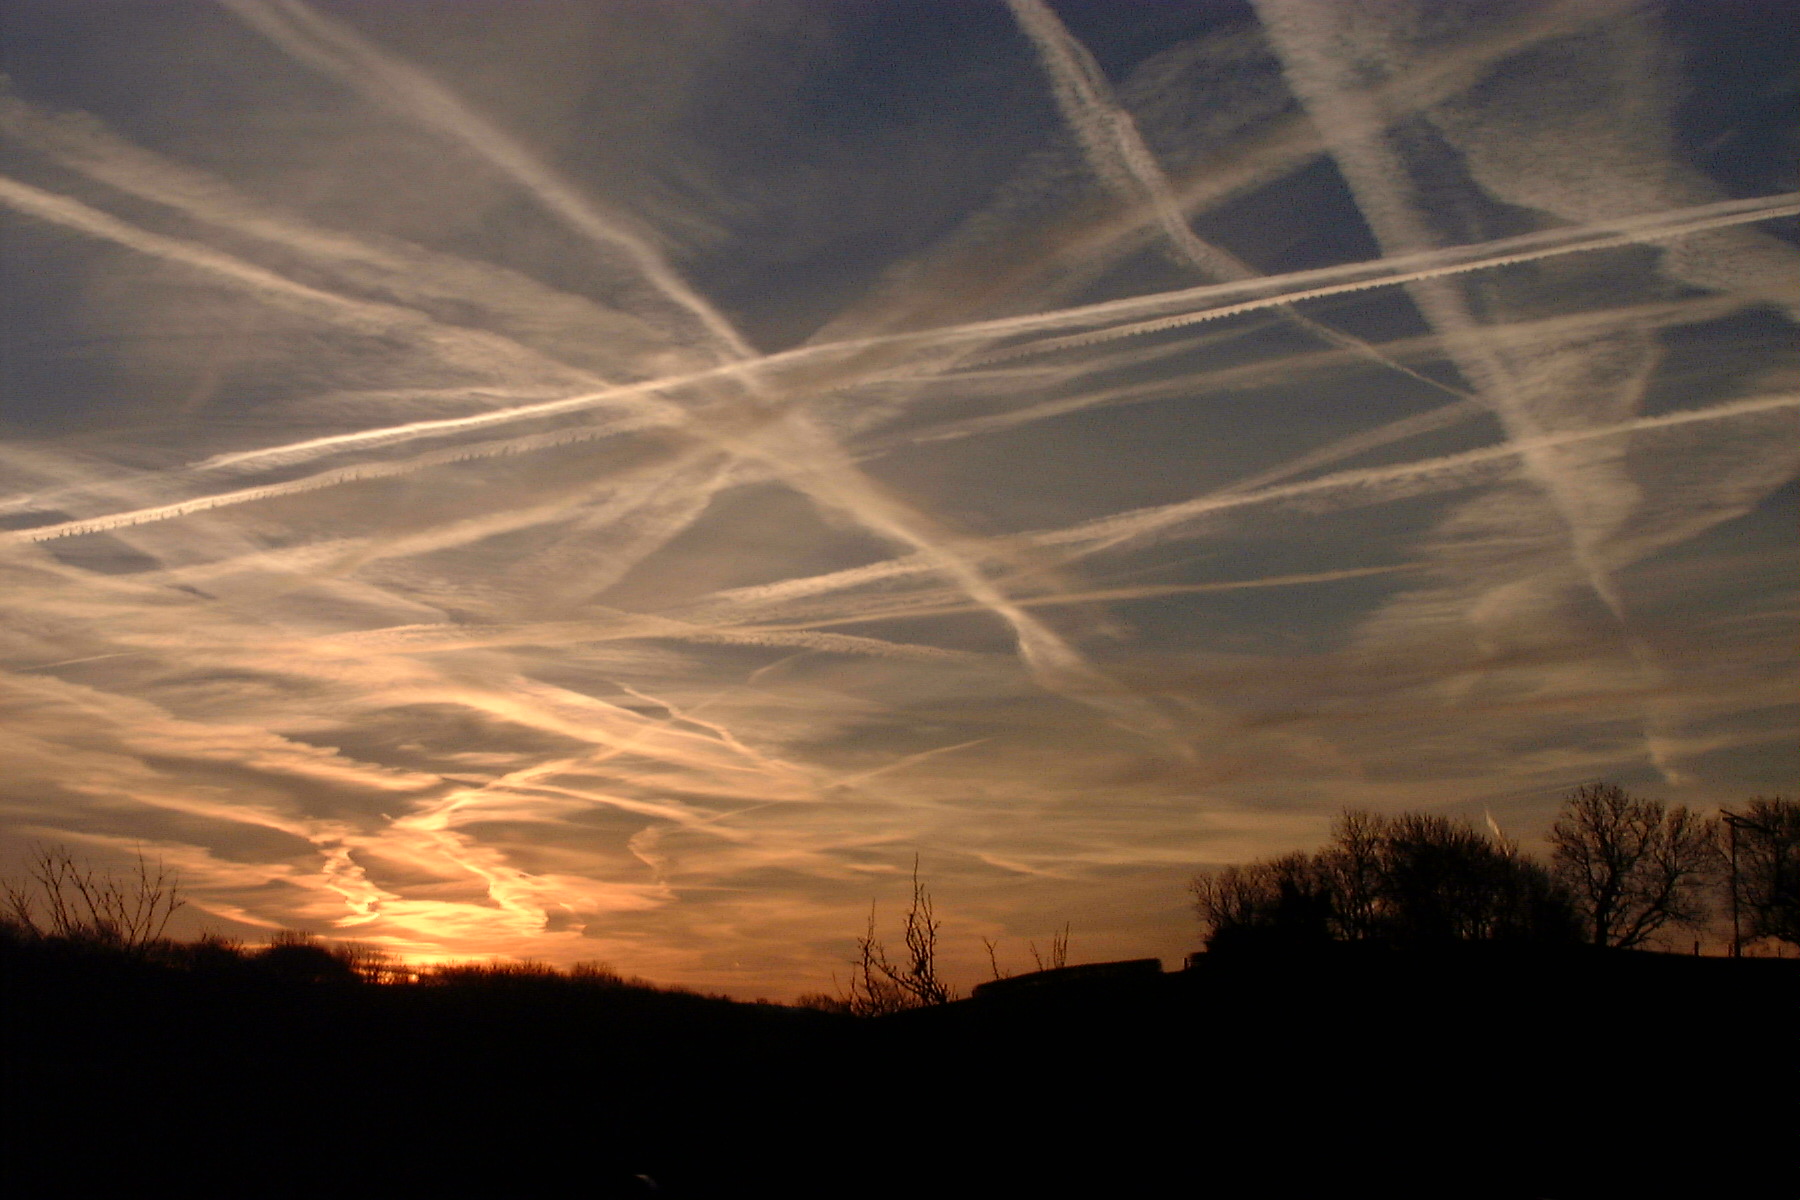 Chemtrails, Disinformation and the Sixth Extinction